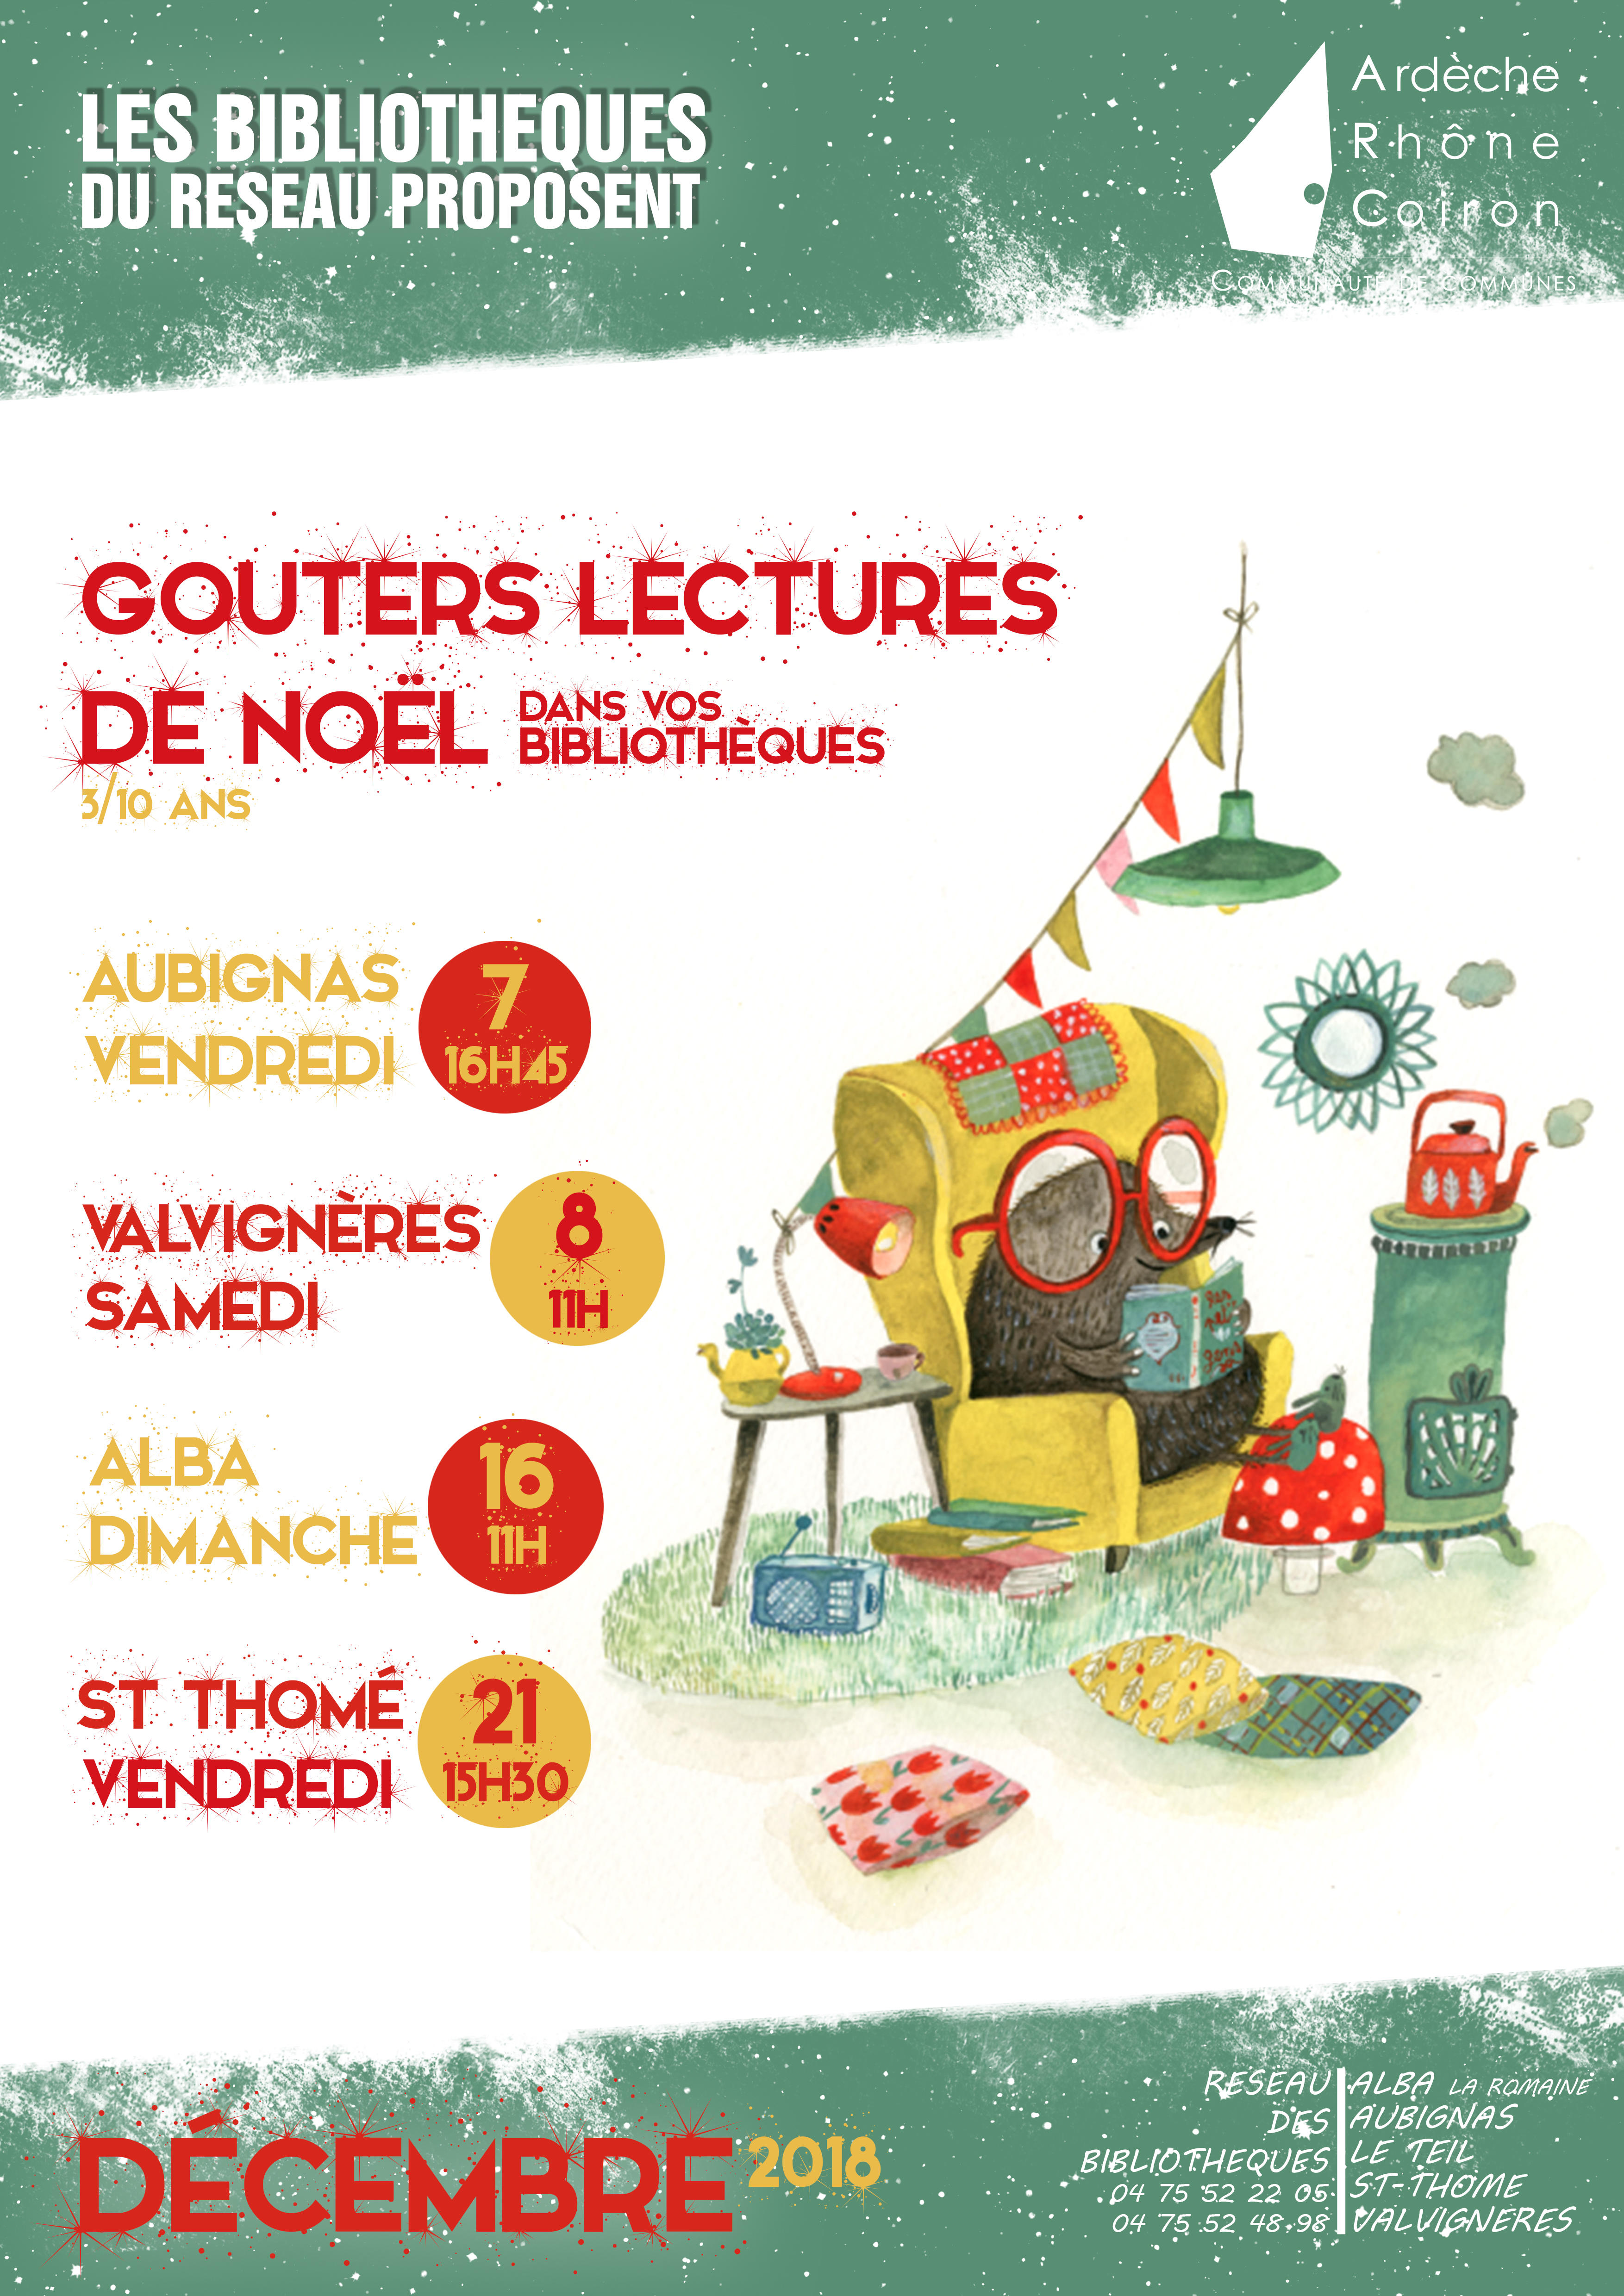 gouter lecture noel allegee